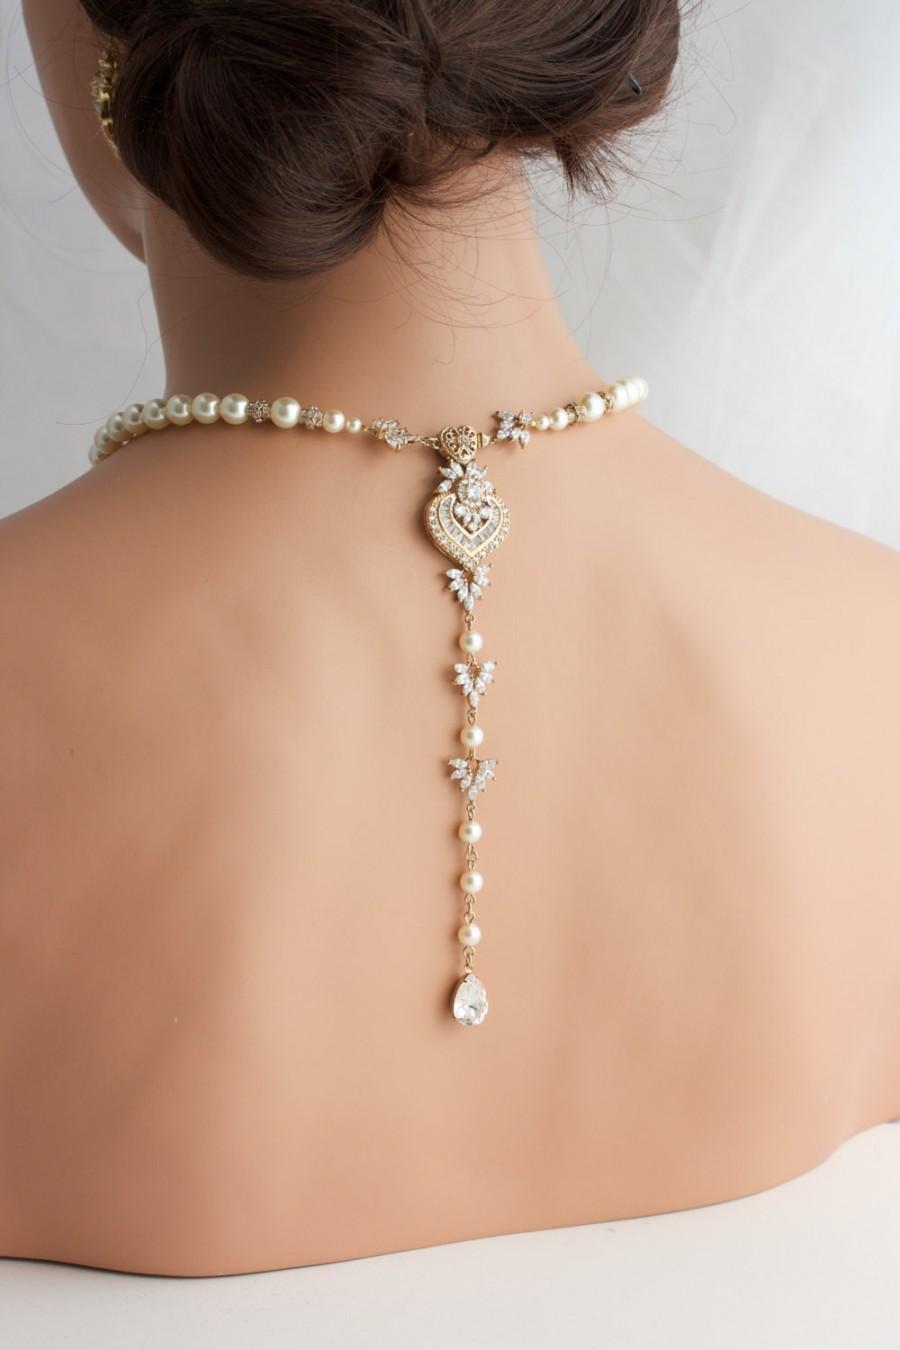 Свадьба - Wedding Jewelry Gold Backdrop Necklace Long Back Drop Bridal Necklace Pearl Crystal Wedding Necklace EVIE